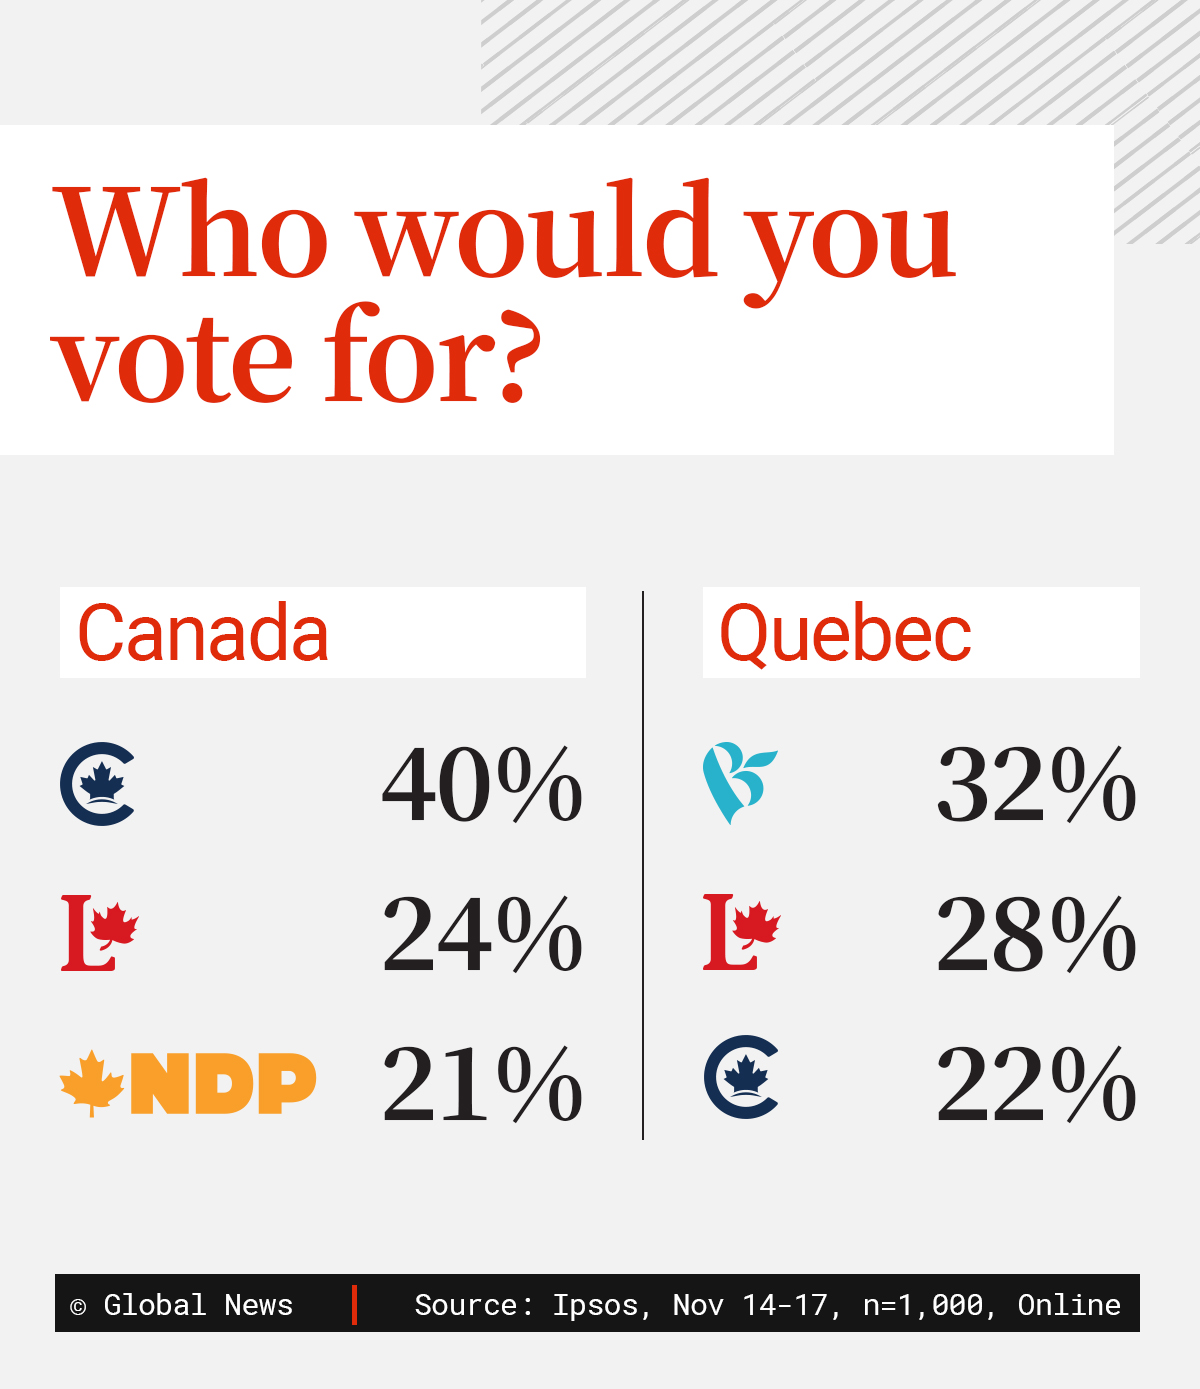 Poll says three in four want Trudeau to go, but Trudeau insists he’ll stay - image